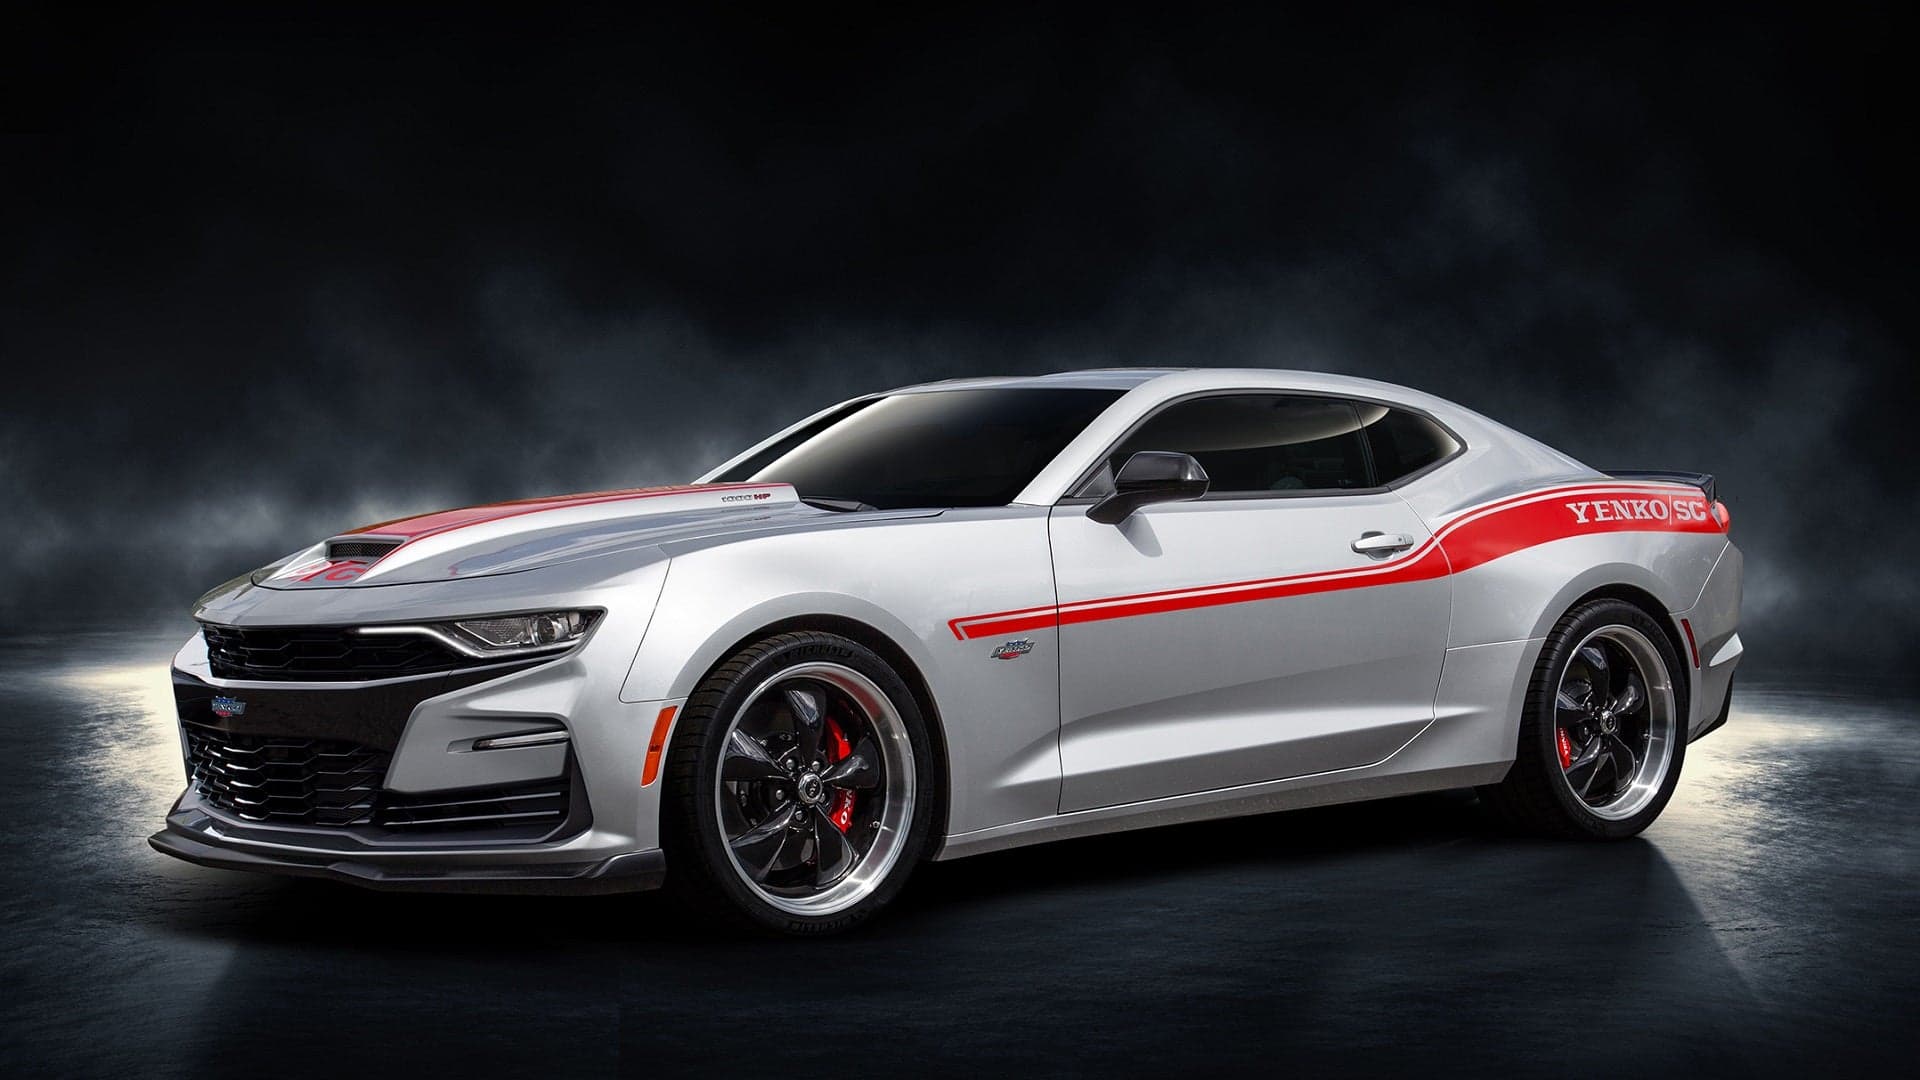 The 1,000-Horsepower 2019 Yenko/SC Camaro Is Now on Sale at a Dealer Near You